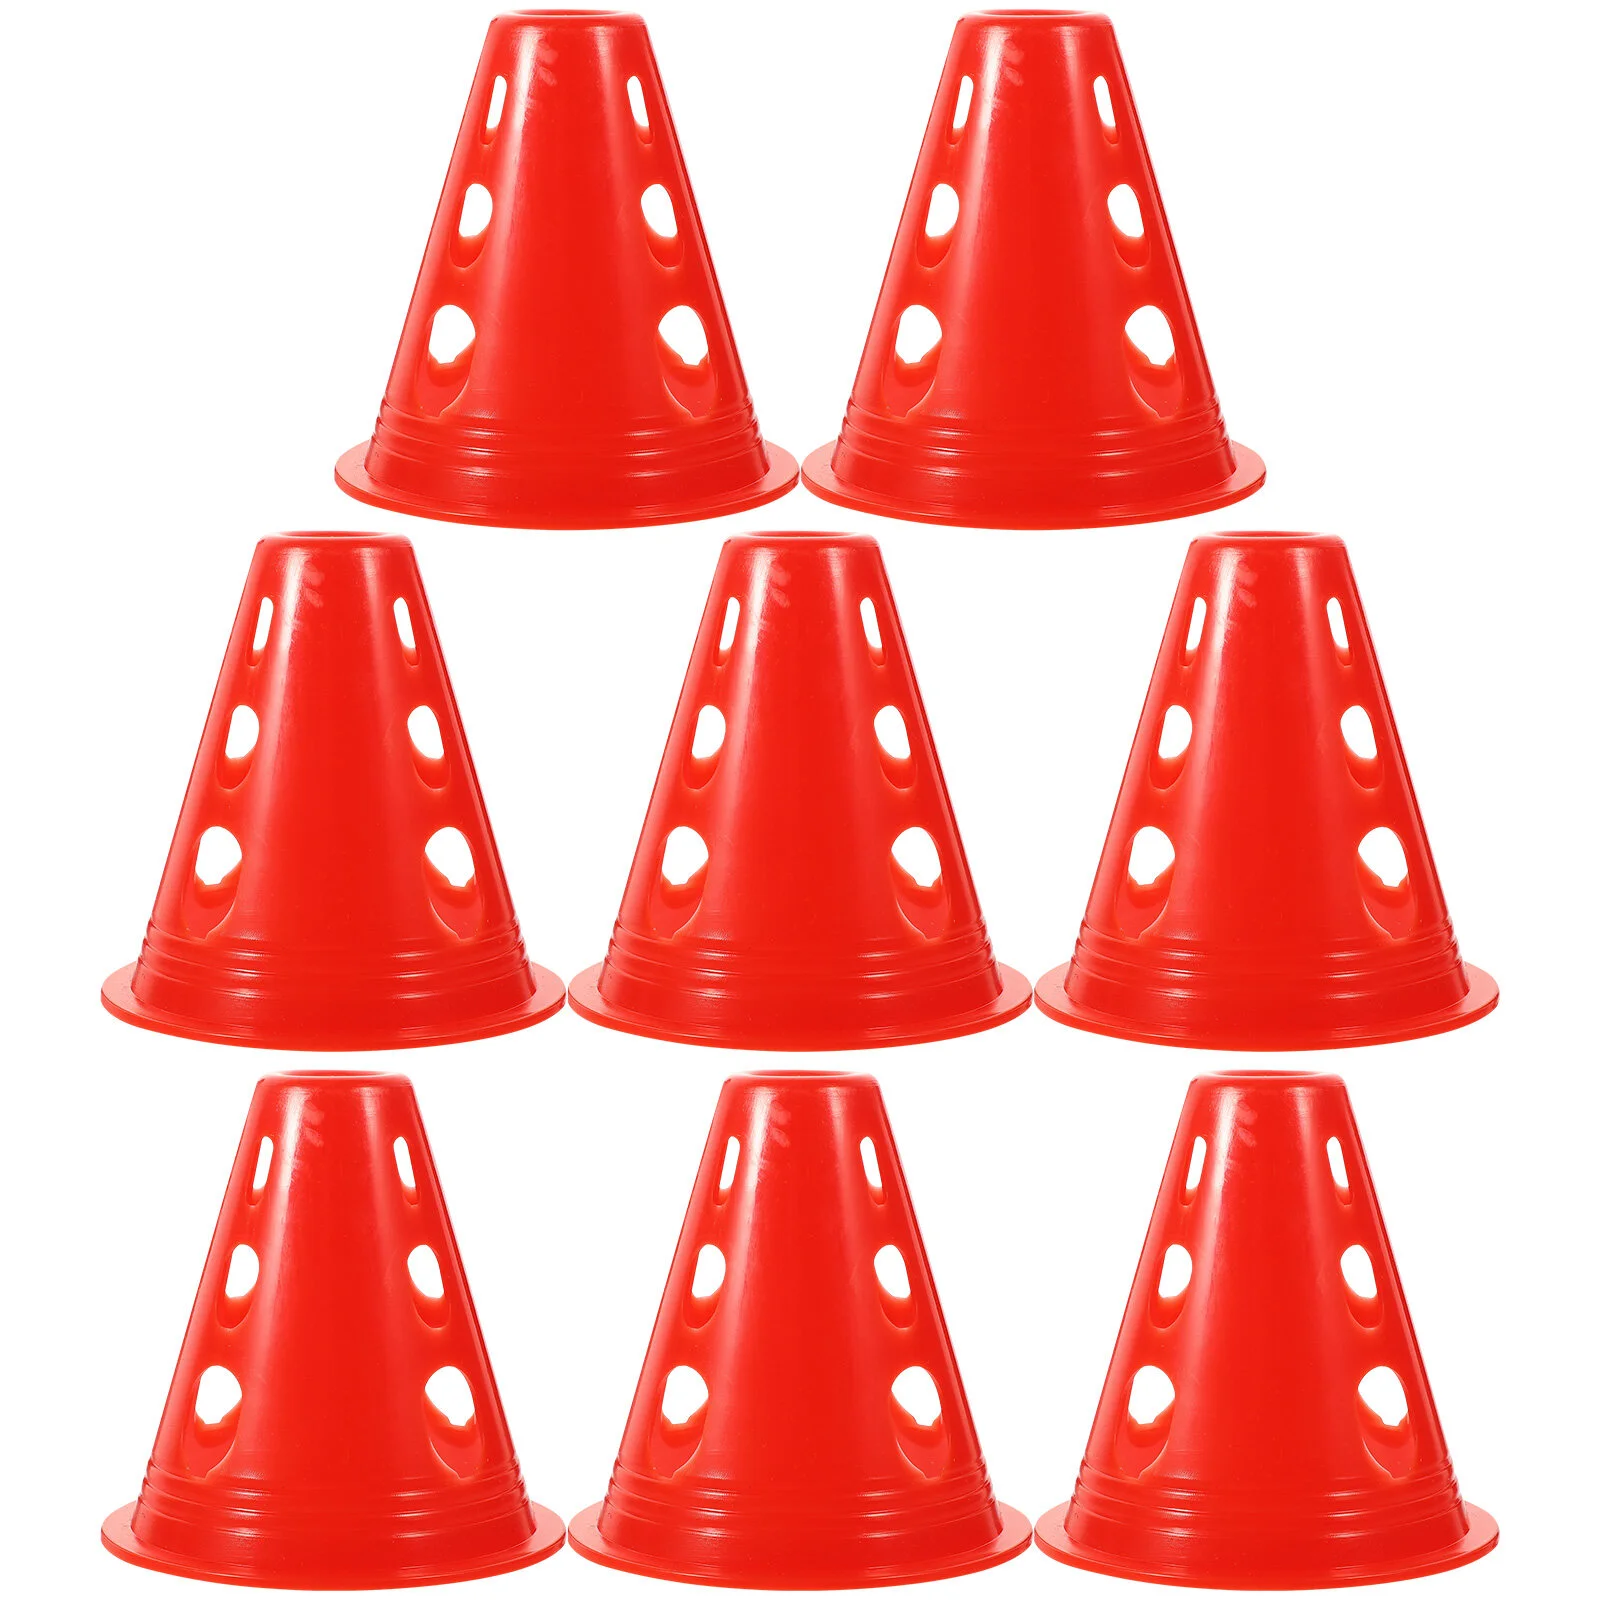 

20 Pcs Mini Soccer Ball Around The Pile Gym Training Cone Cones 8cm Construction Plastic Universal Skating Marker Markers